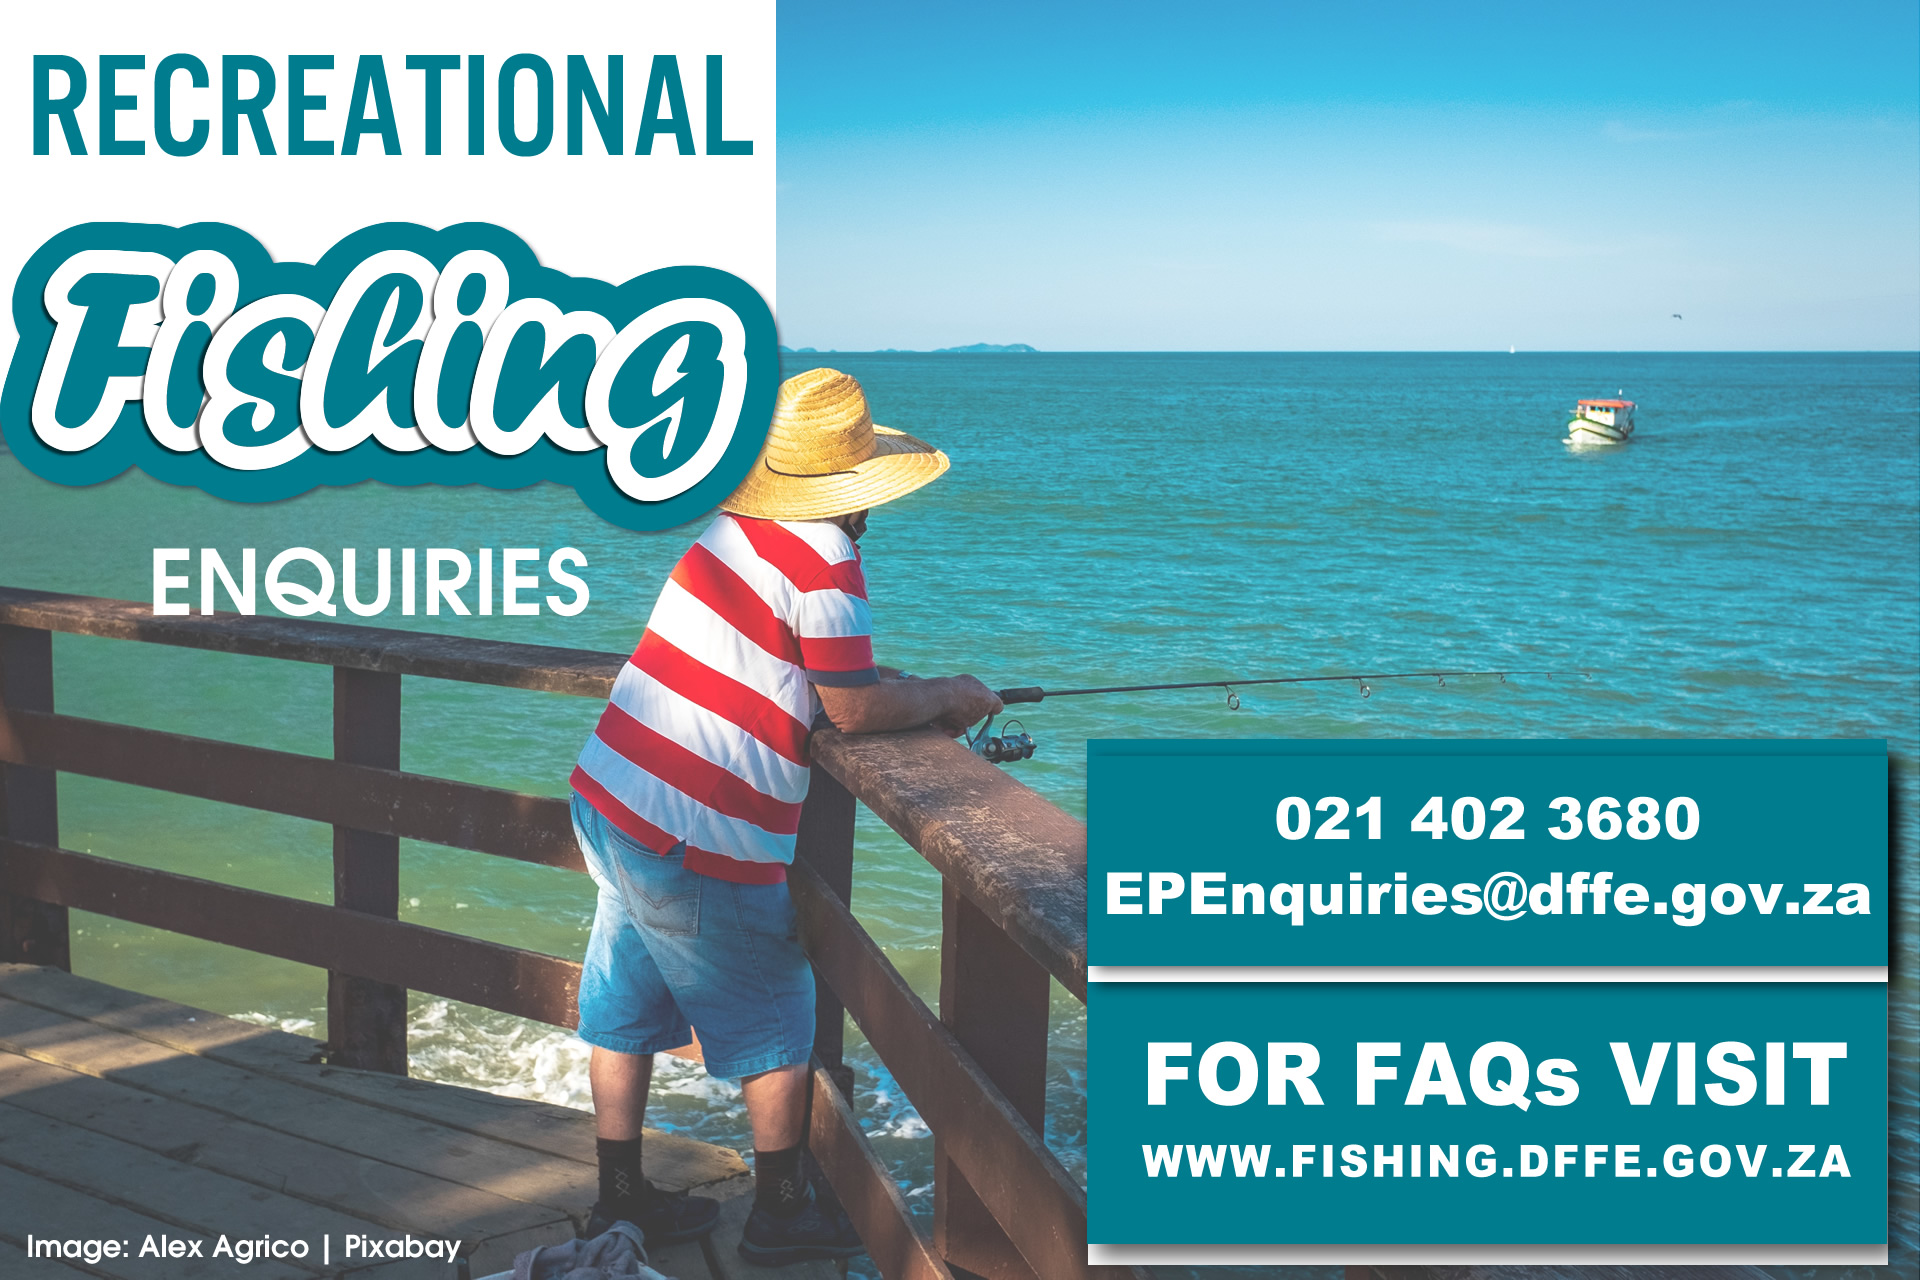 visit the e-fishing website: www.fishing.dffe.gov.za to get the frequently asked questions (FAQs)